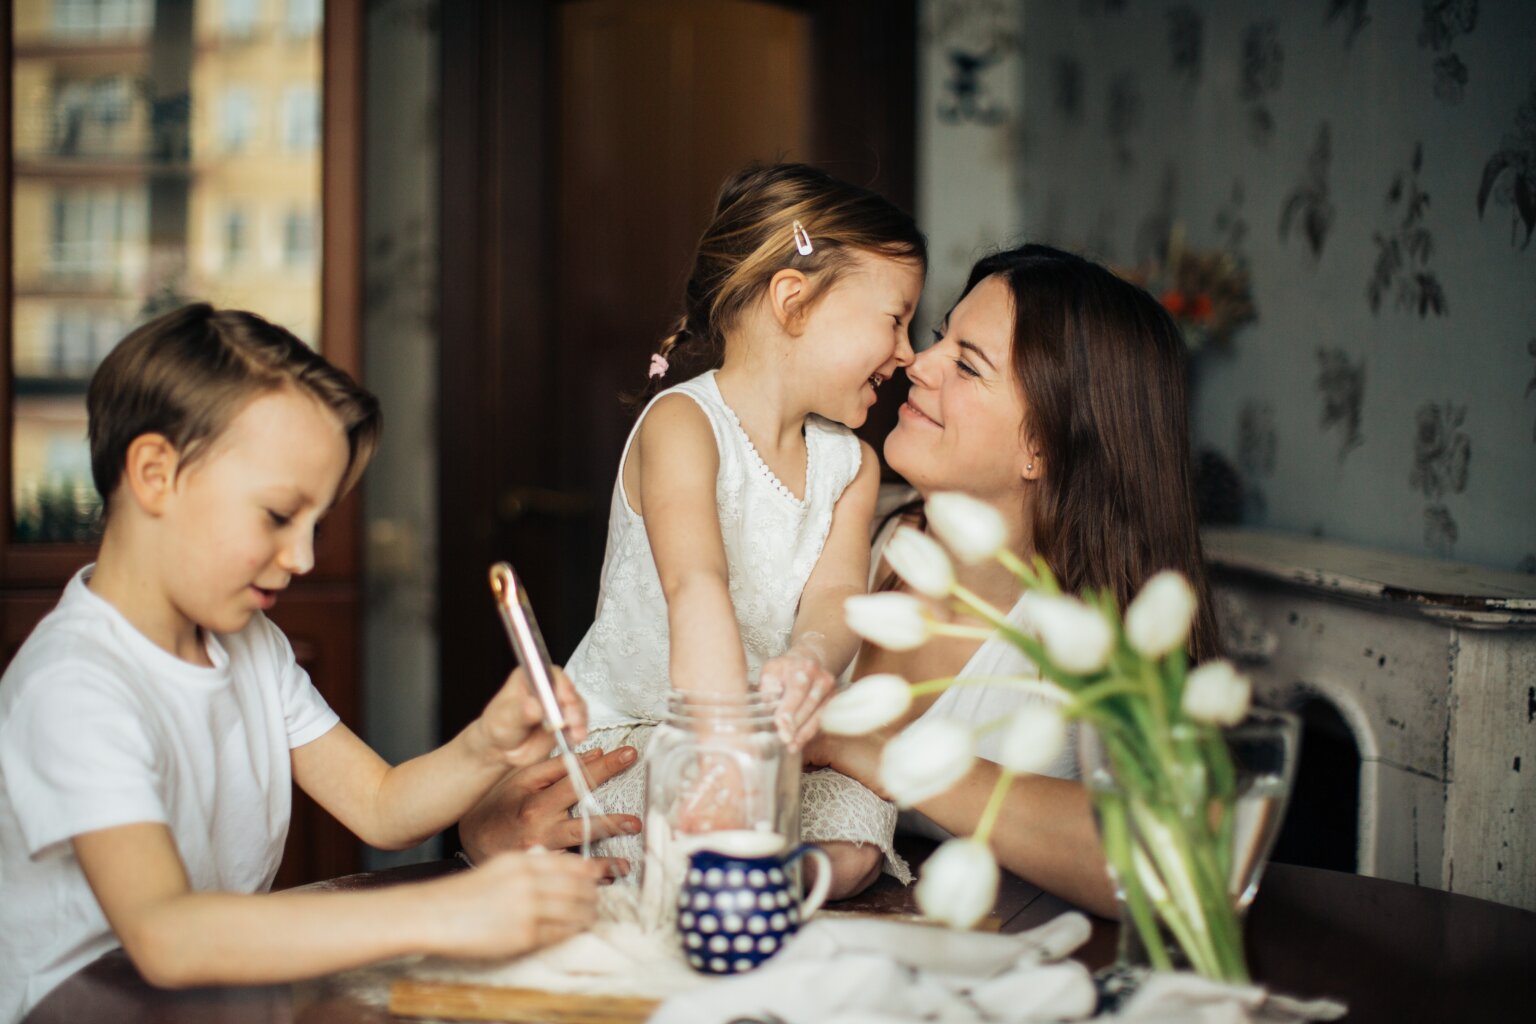 A mom and her daughter touching their noses together while the mom, daughter, and son mix flour at a table.